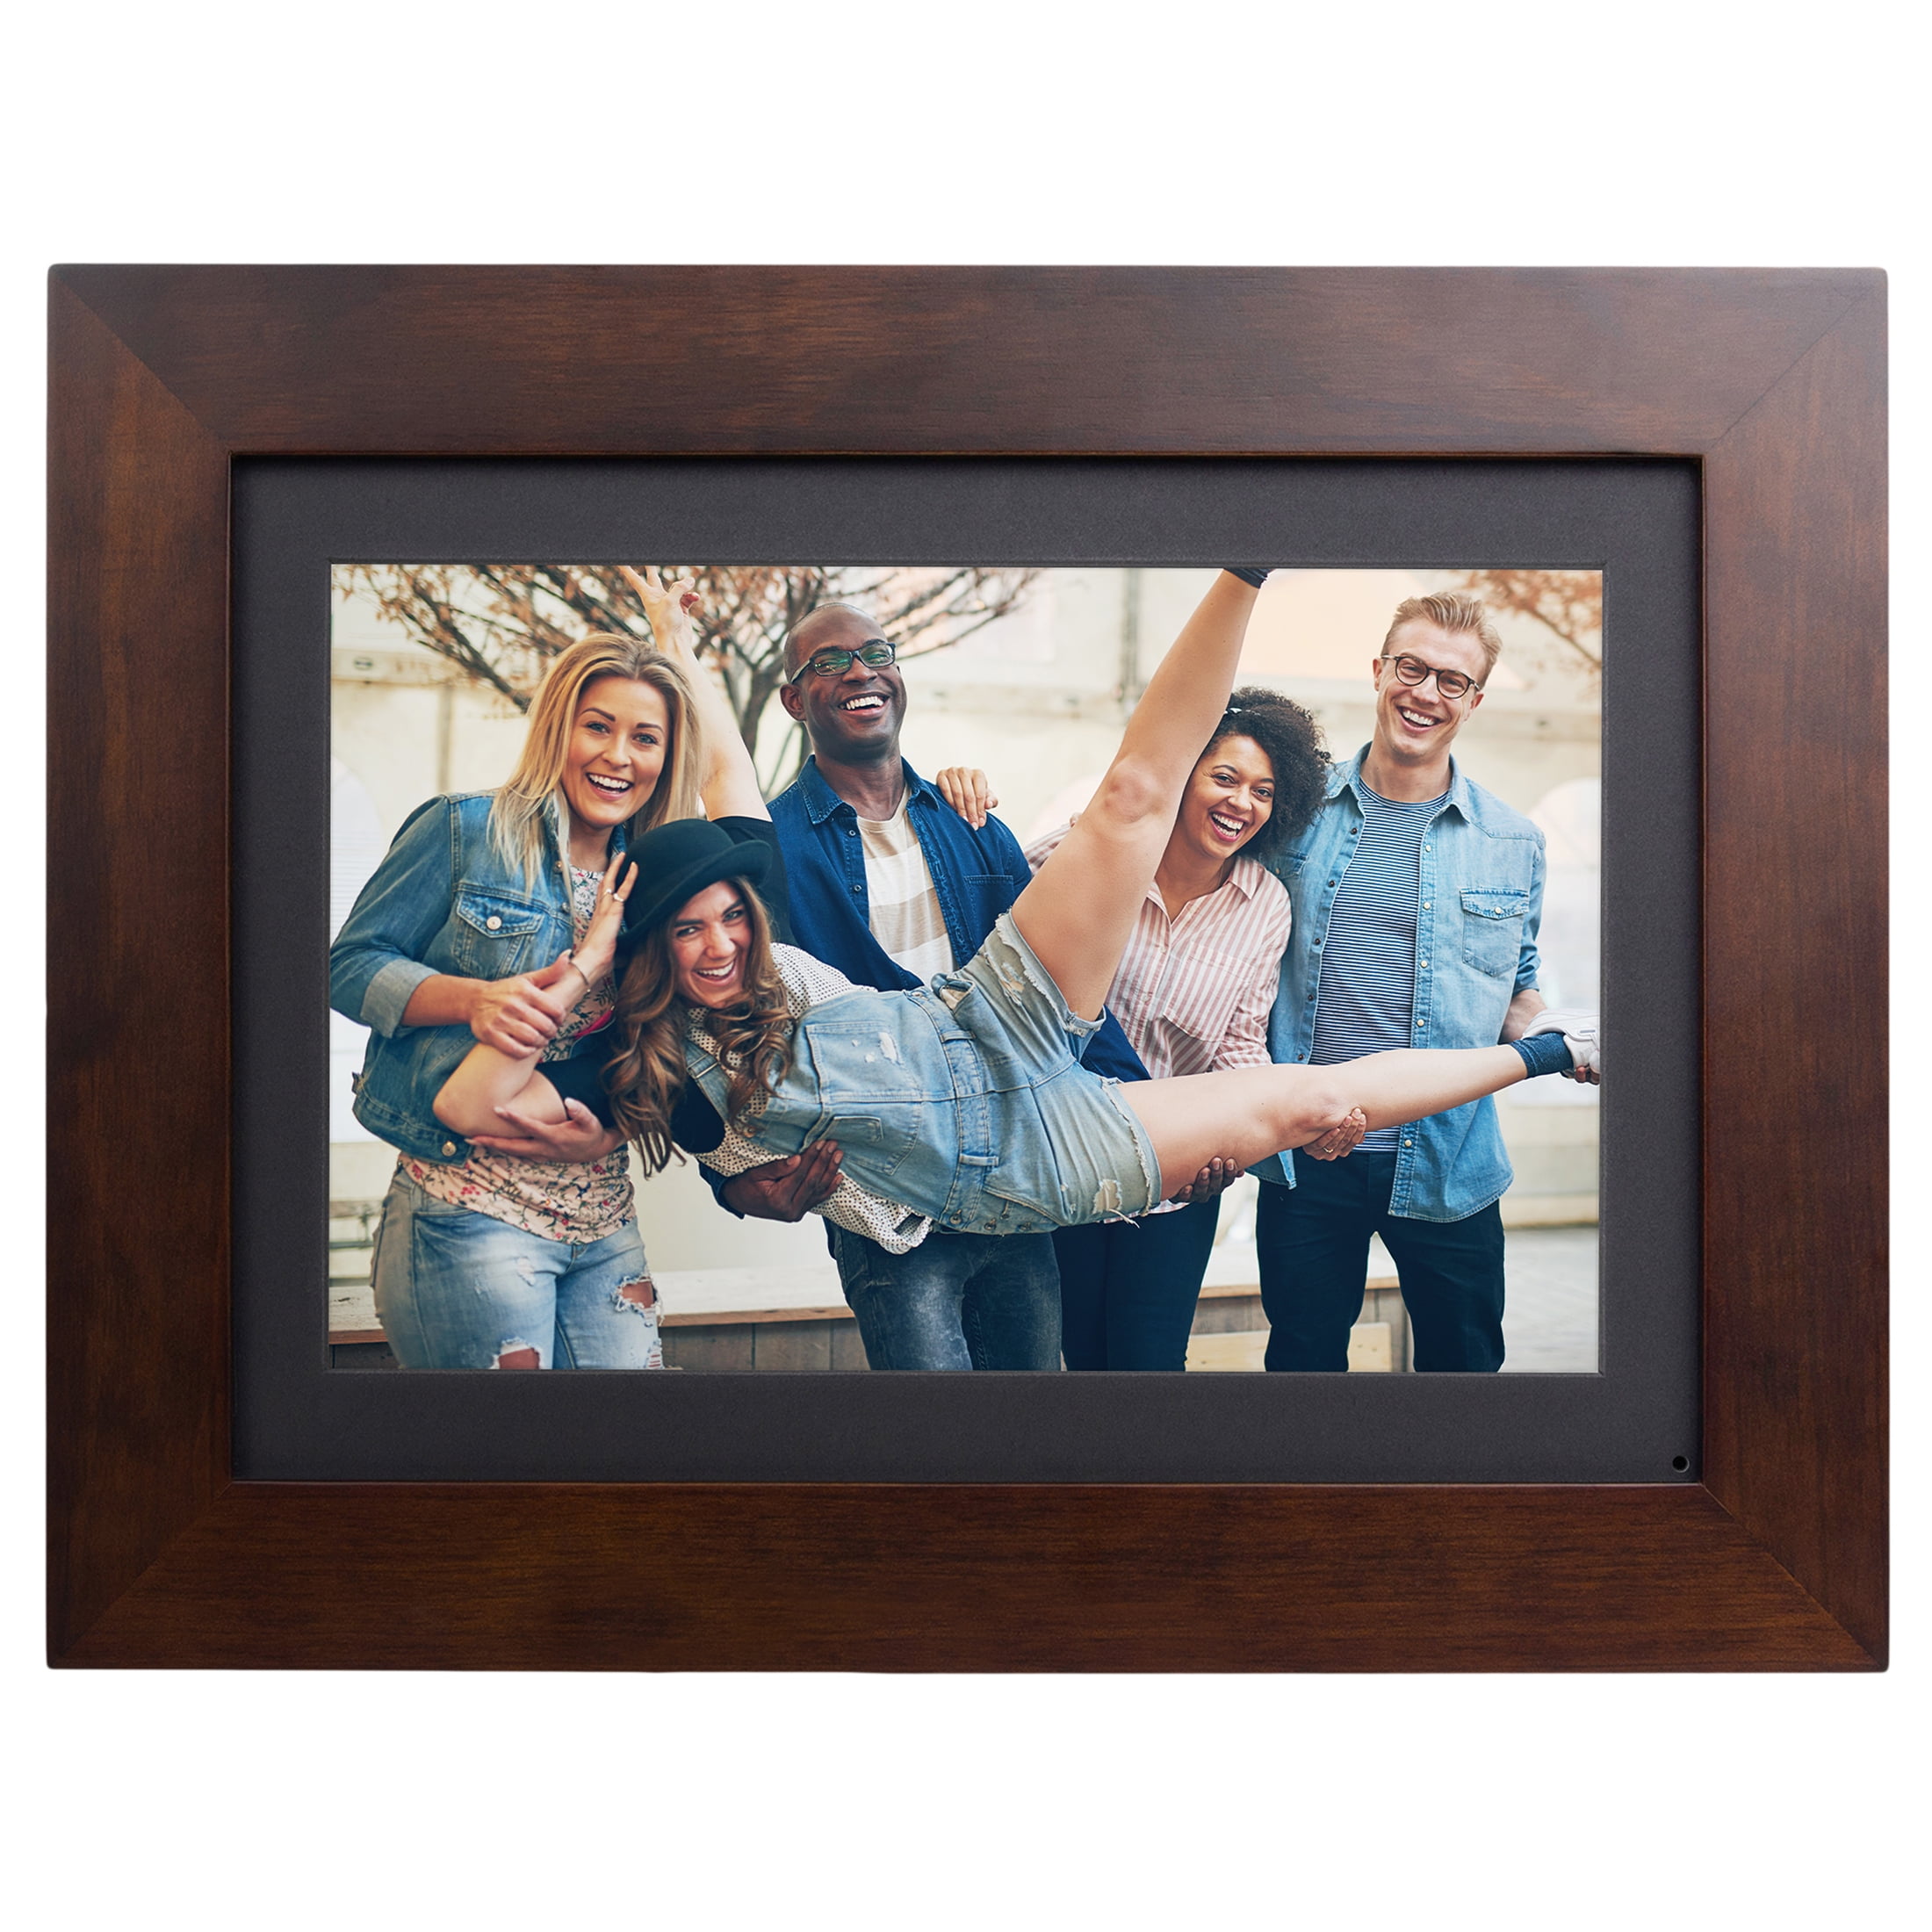 10.1 New Version, Black HD Wood Frame Interchangeable Mattes Home Décor WiFi Brookstone PhotoShare Smart Digital Picture Frame 